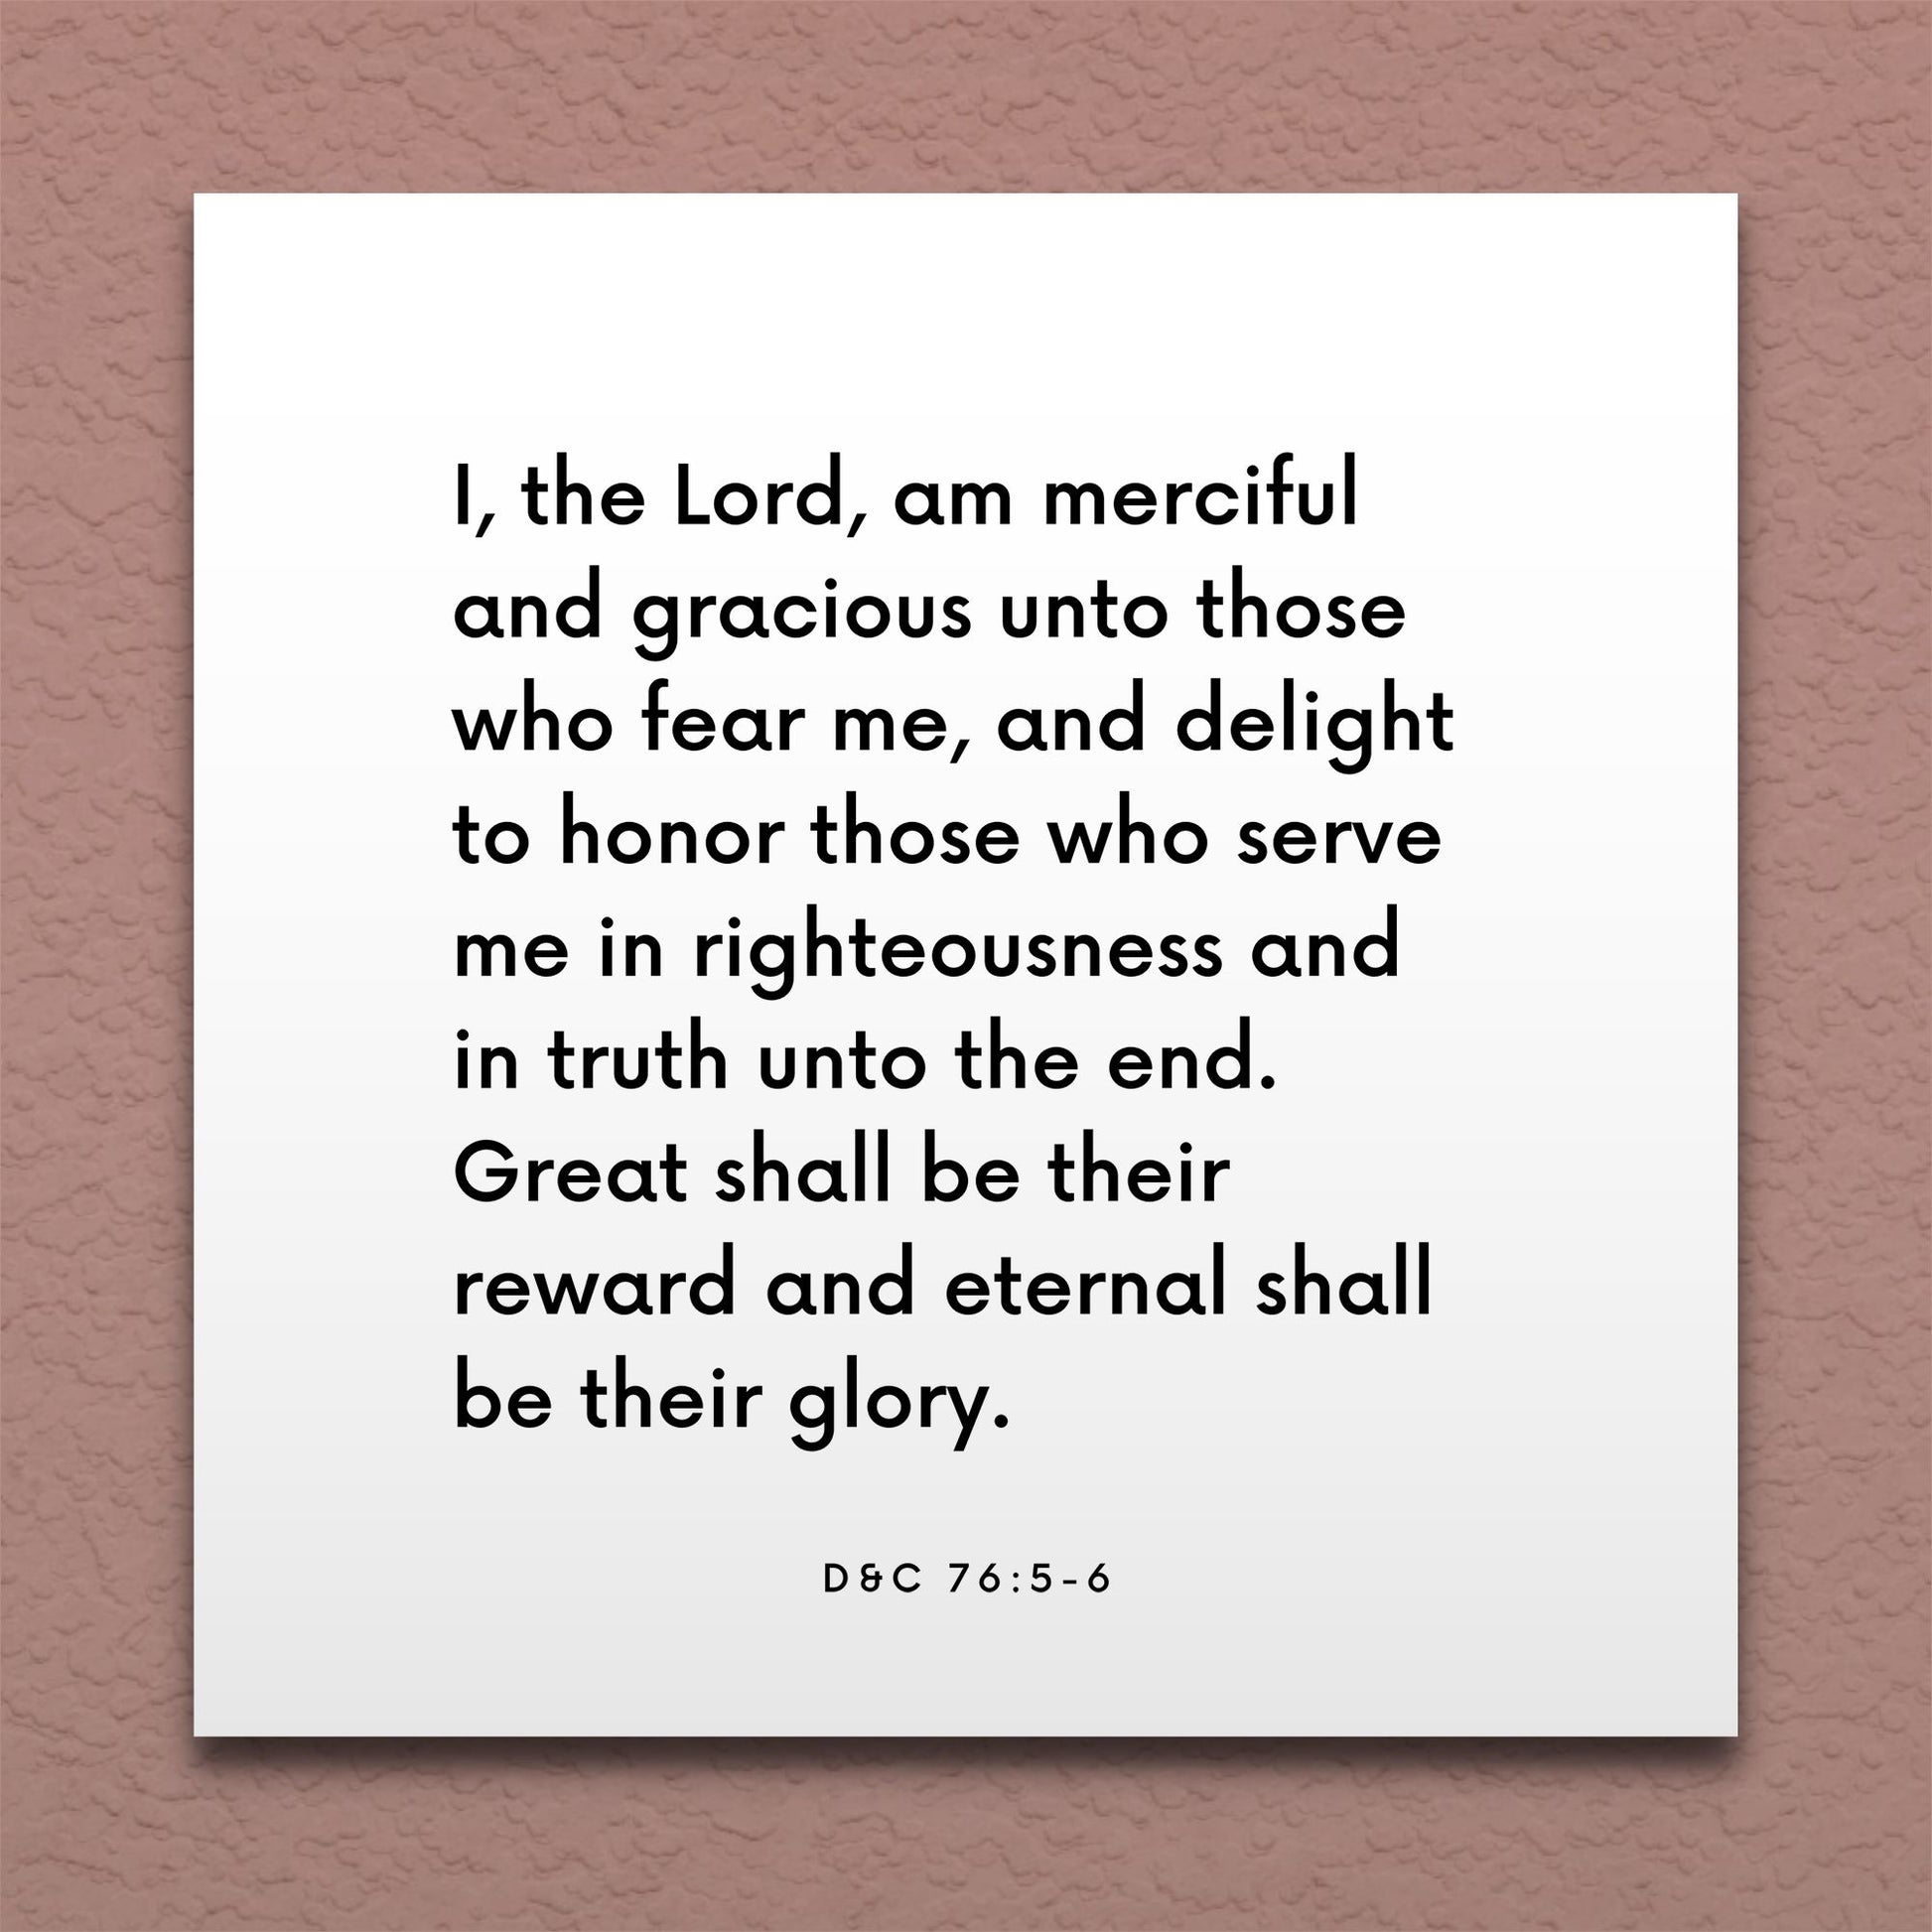 Wall-mounted scripture tile for D&C 76:5-6 - "I, the Lord, am merciful and gracious unto those who fear me"